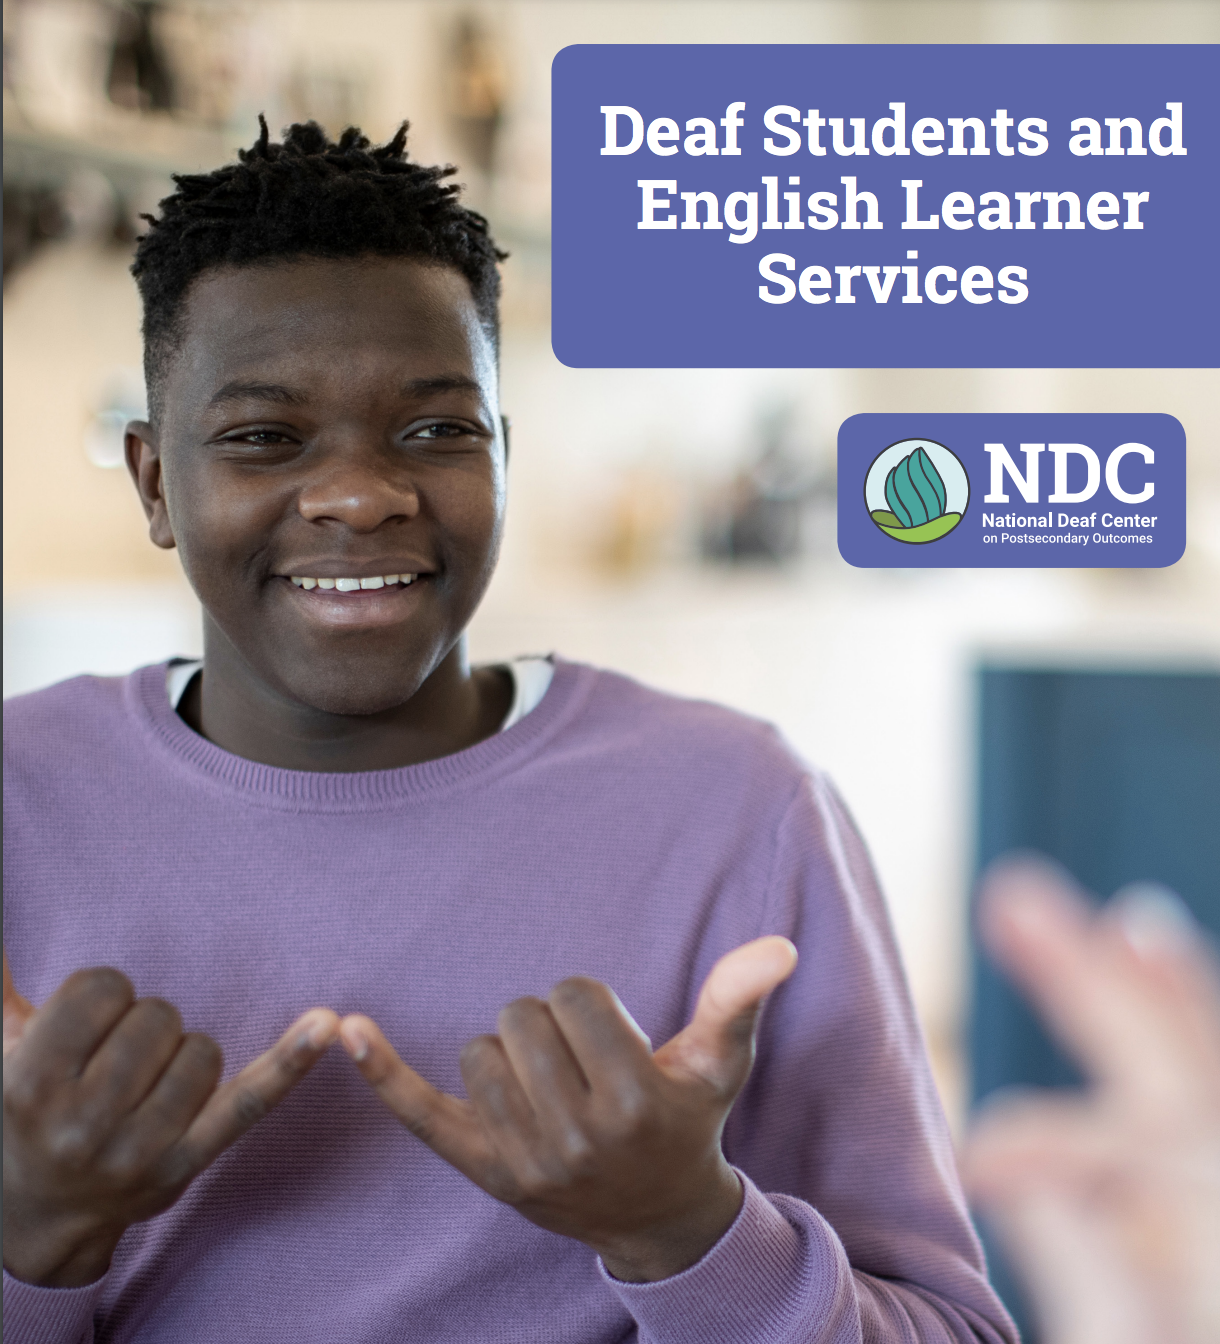 The image shows a person smiling with their hands up. The text in the image mentions "Deaf Students and English Learner Services" and "NDC National Deaf Center."